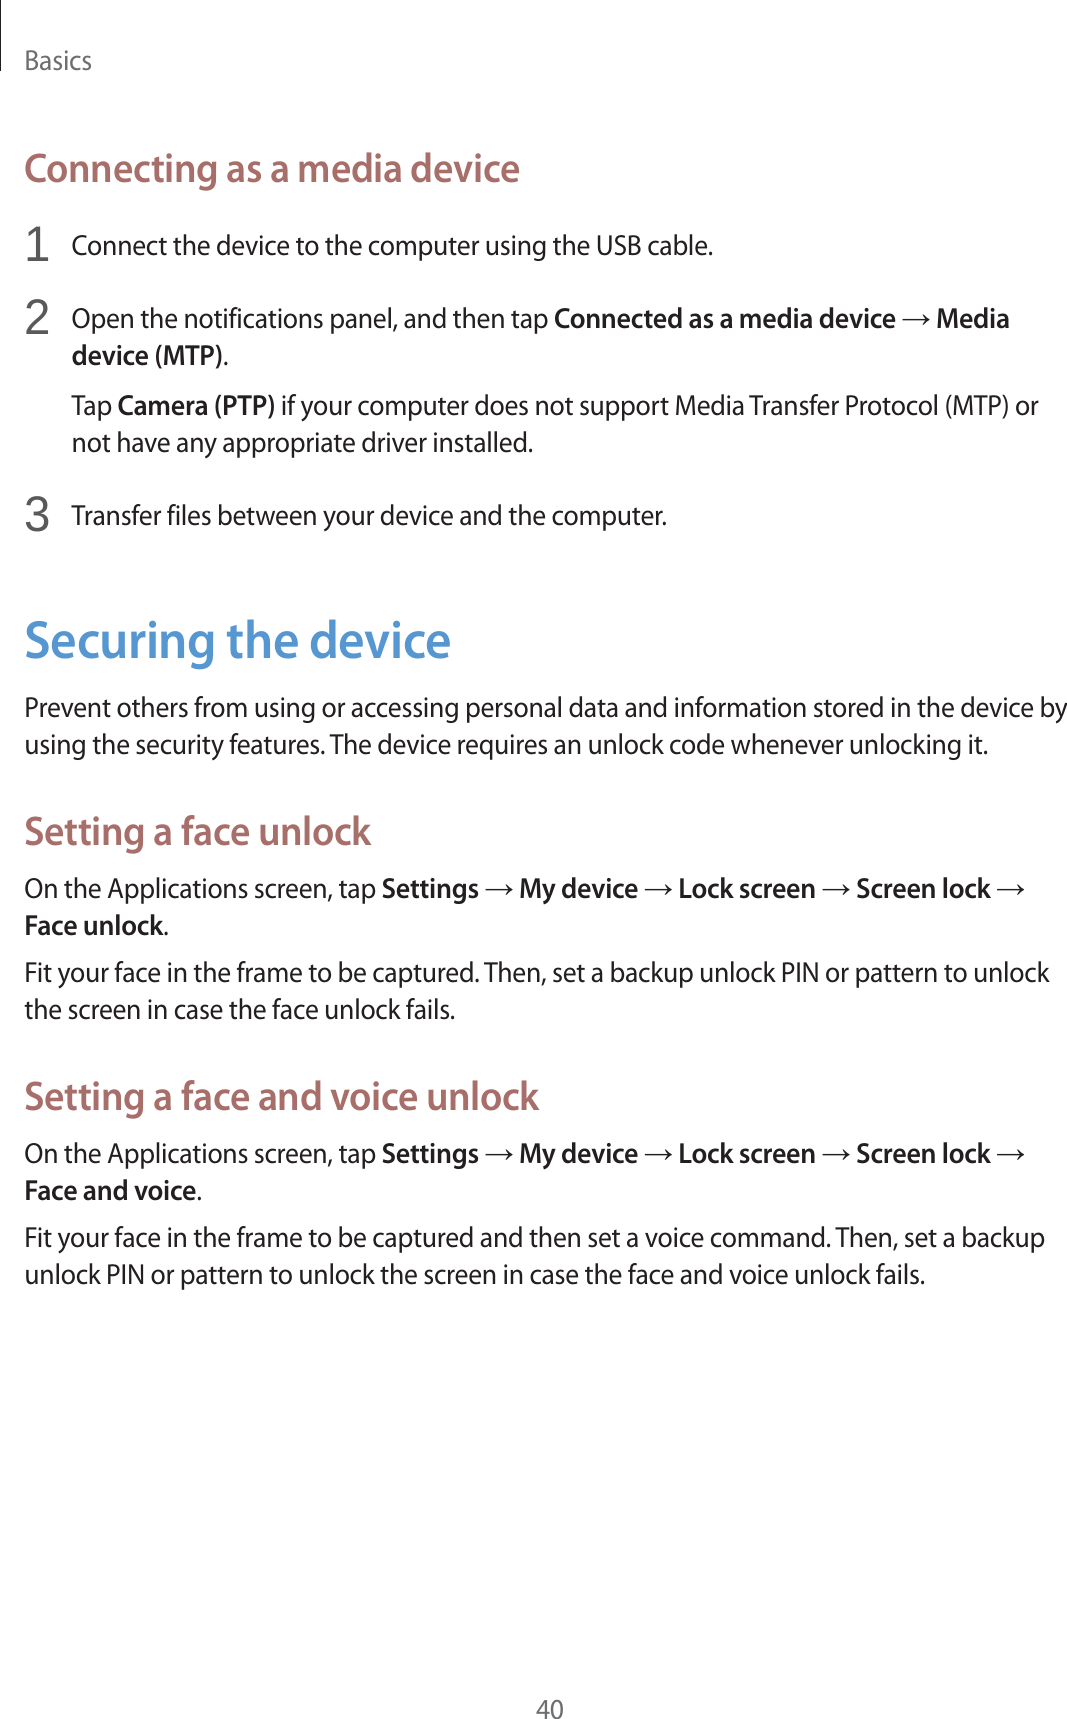 Basics40Connecting as a media device1Connect the device to the computer using the USB cable.2Open the notifications panel, and then tap Connected as a media device ĺ Media device (MTP).Tap Camera (PTP) if your computer does not support Media Transfer Protocol (MTP) or not have any appropriate driver installed.3Transfer files between your device and the computer.Securing the devicePrevent others from using or accessing personal data and information stored in the device by using the security features. The device requires an unlock code whenever unlocking it.Setting a face unlockOn the Applications screen, tap Settings ĺ My device ĺ Lock screen ĺ Screen lock ĺ Face unlock.Fit your face in the frame to be captured. Then, set a backup unlock PIN or pattern to unlock the screen in case the face unlock fails.Setting a face and voice unlockOn the Applications screen, tap Settings ĺ My device ĺ Lock screen ĺ Screen lock ĺ Face and voice.Fit your face in the frame to be captured and then set a voice command. Then, set a backup unlock PIN or pattern to unlock the screen in case the face and voice unlock fails.